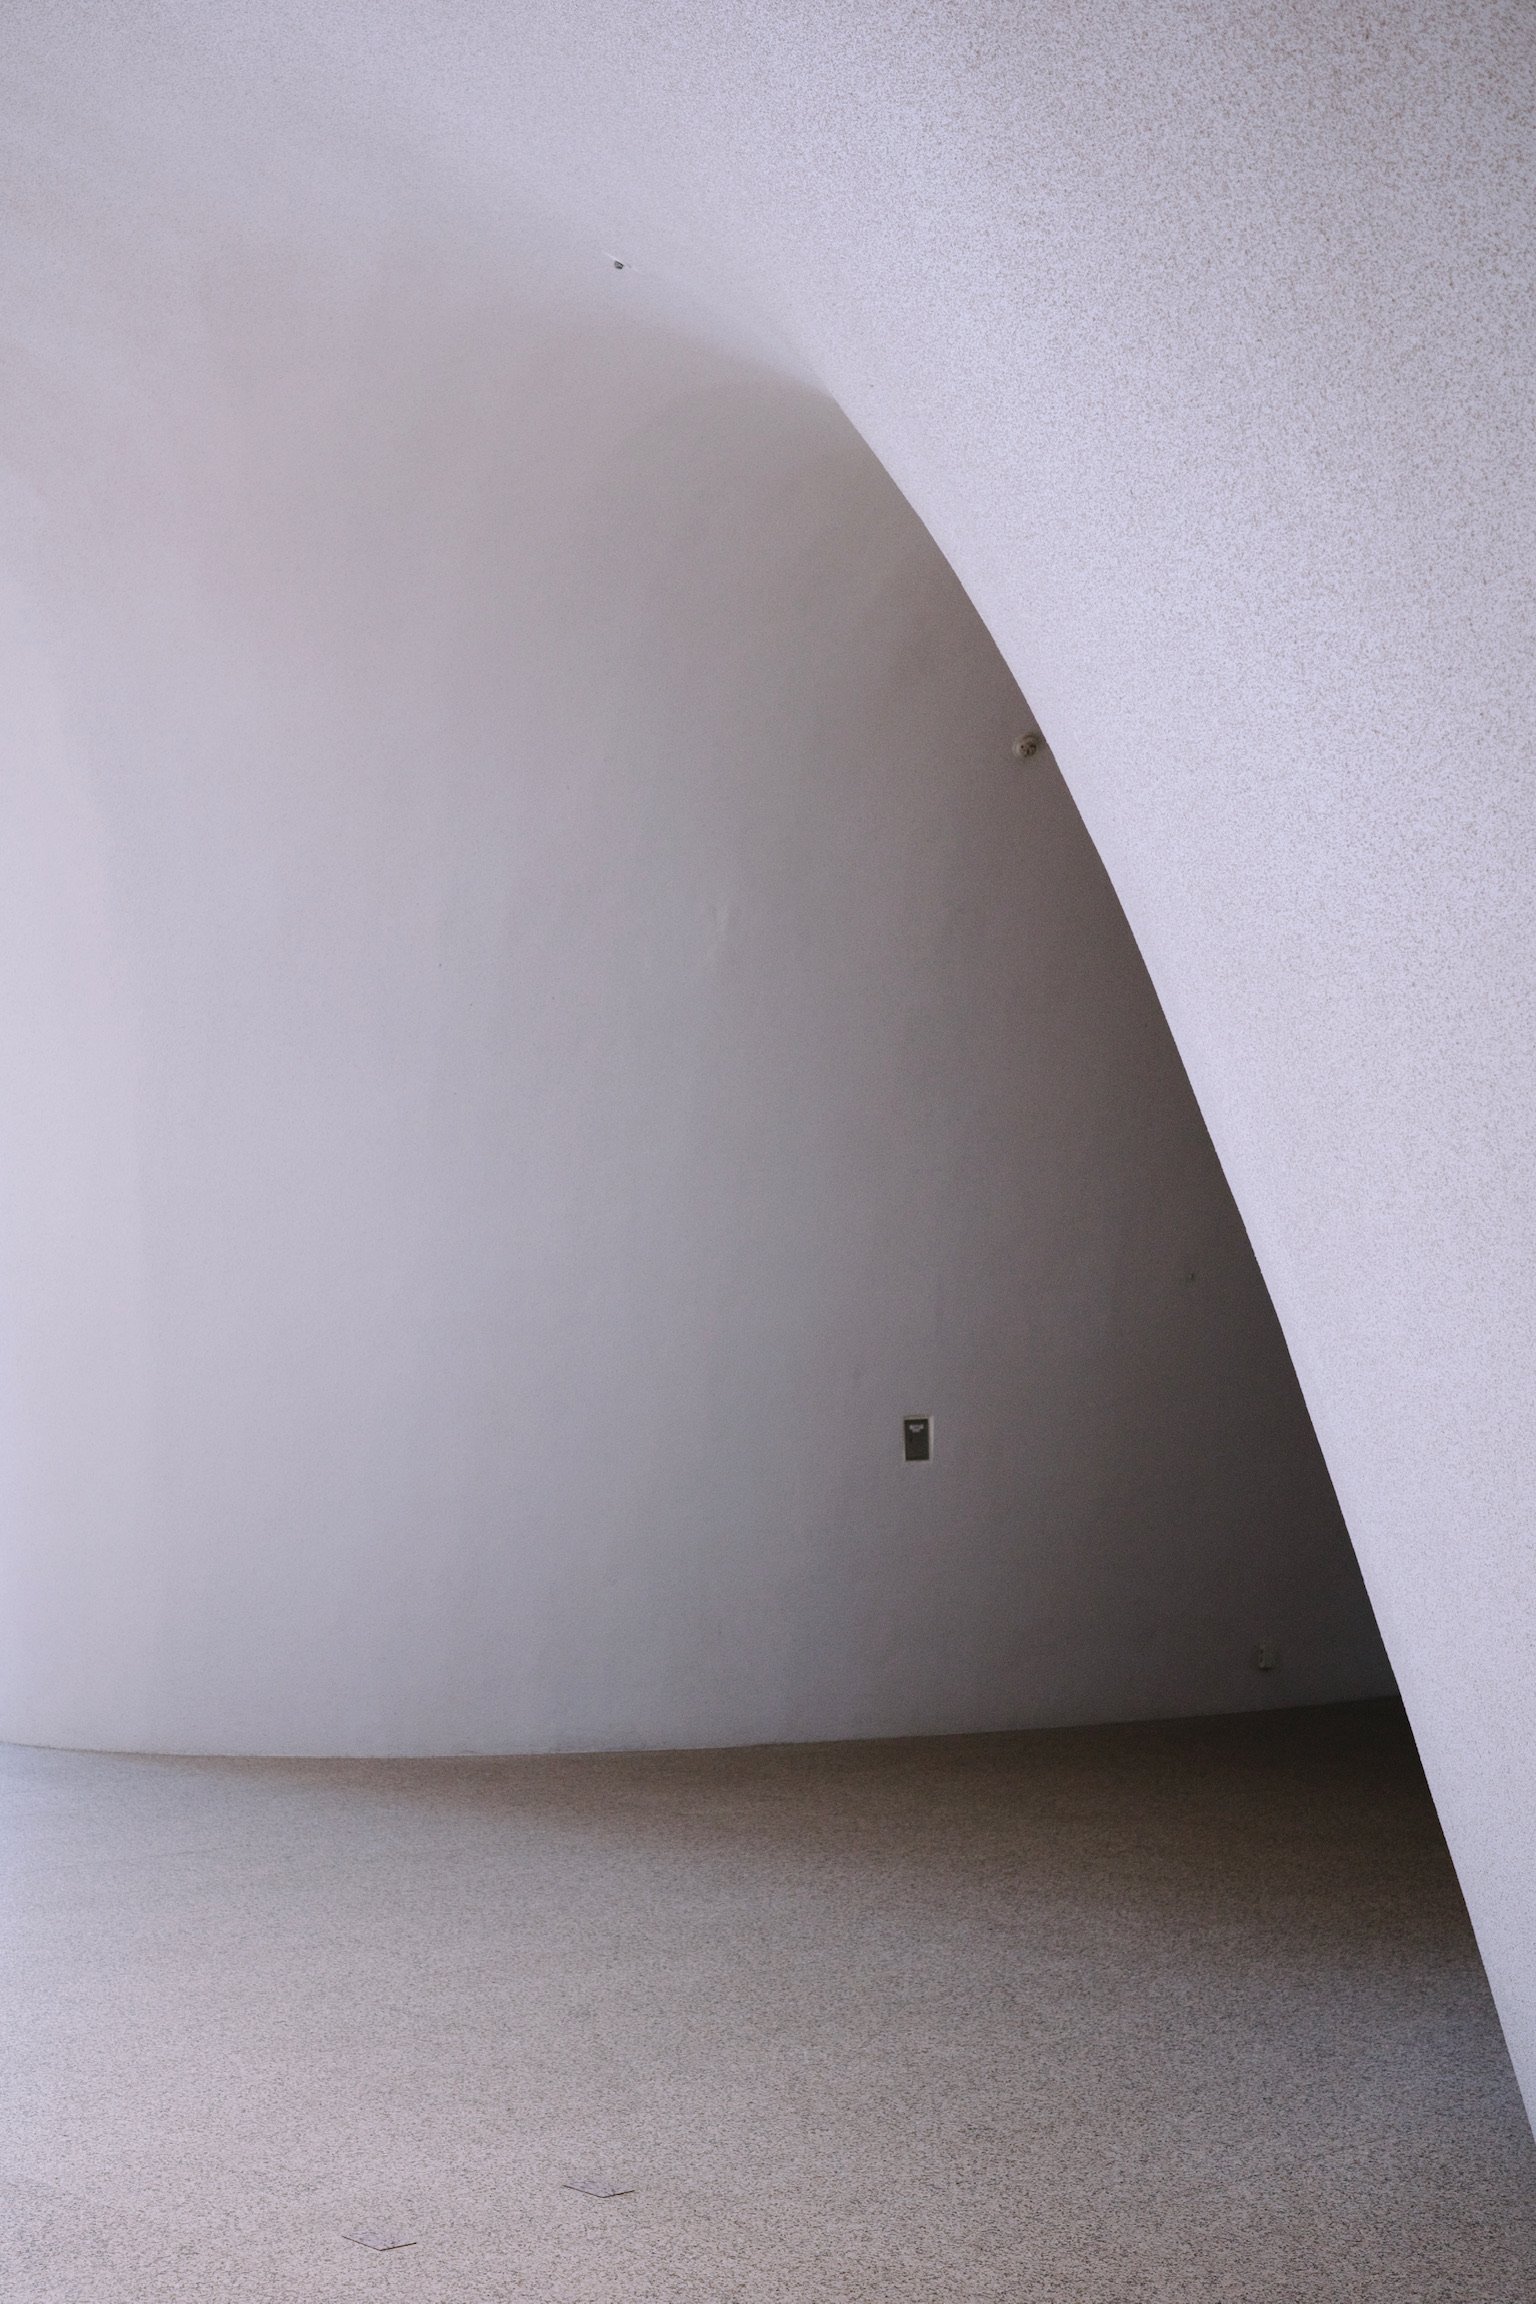 Interior space featuring smooth white walls, curved corners, and soft shadows.